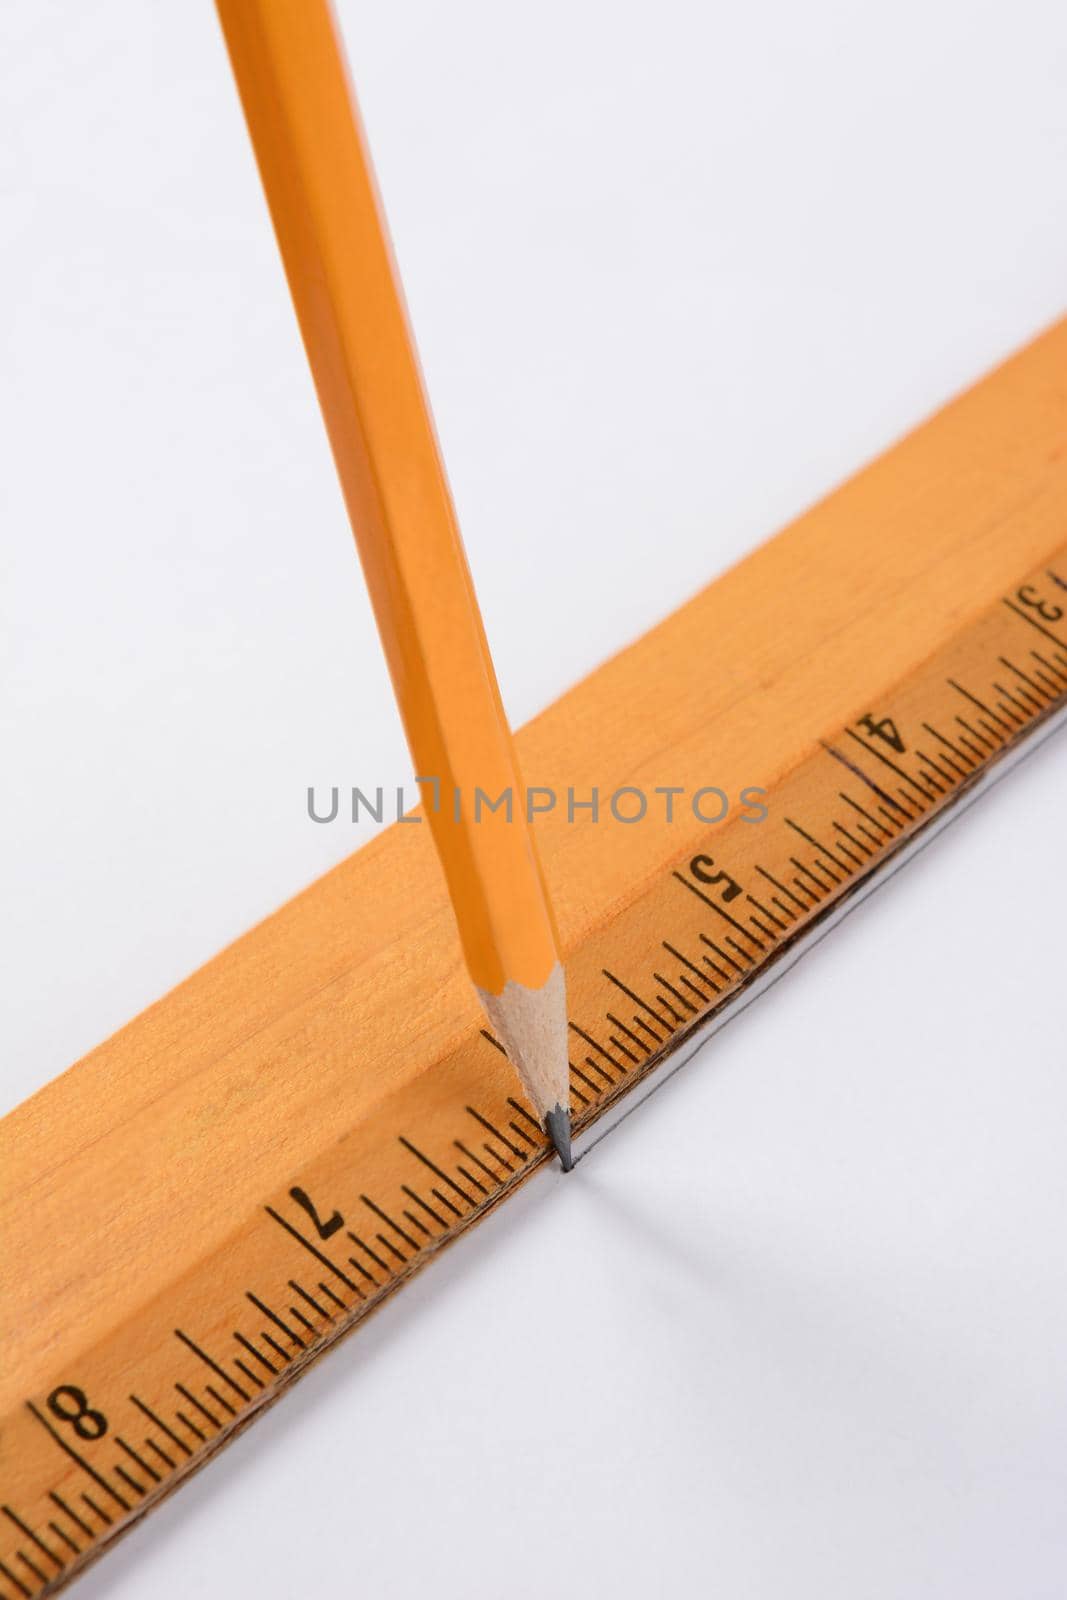 A pencil and ruler drawing a line on a white sheet of paper. Closeup in vertical format.